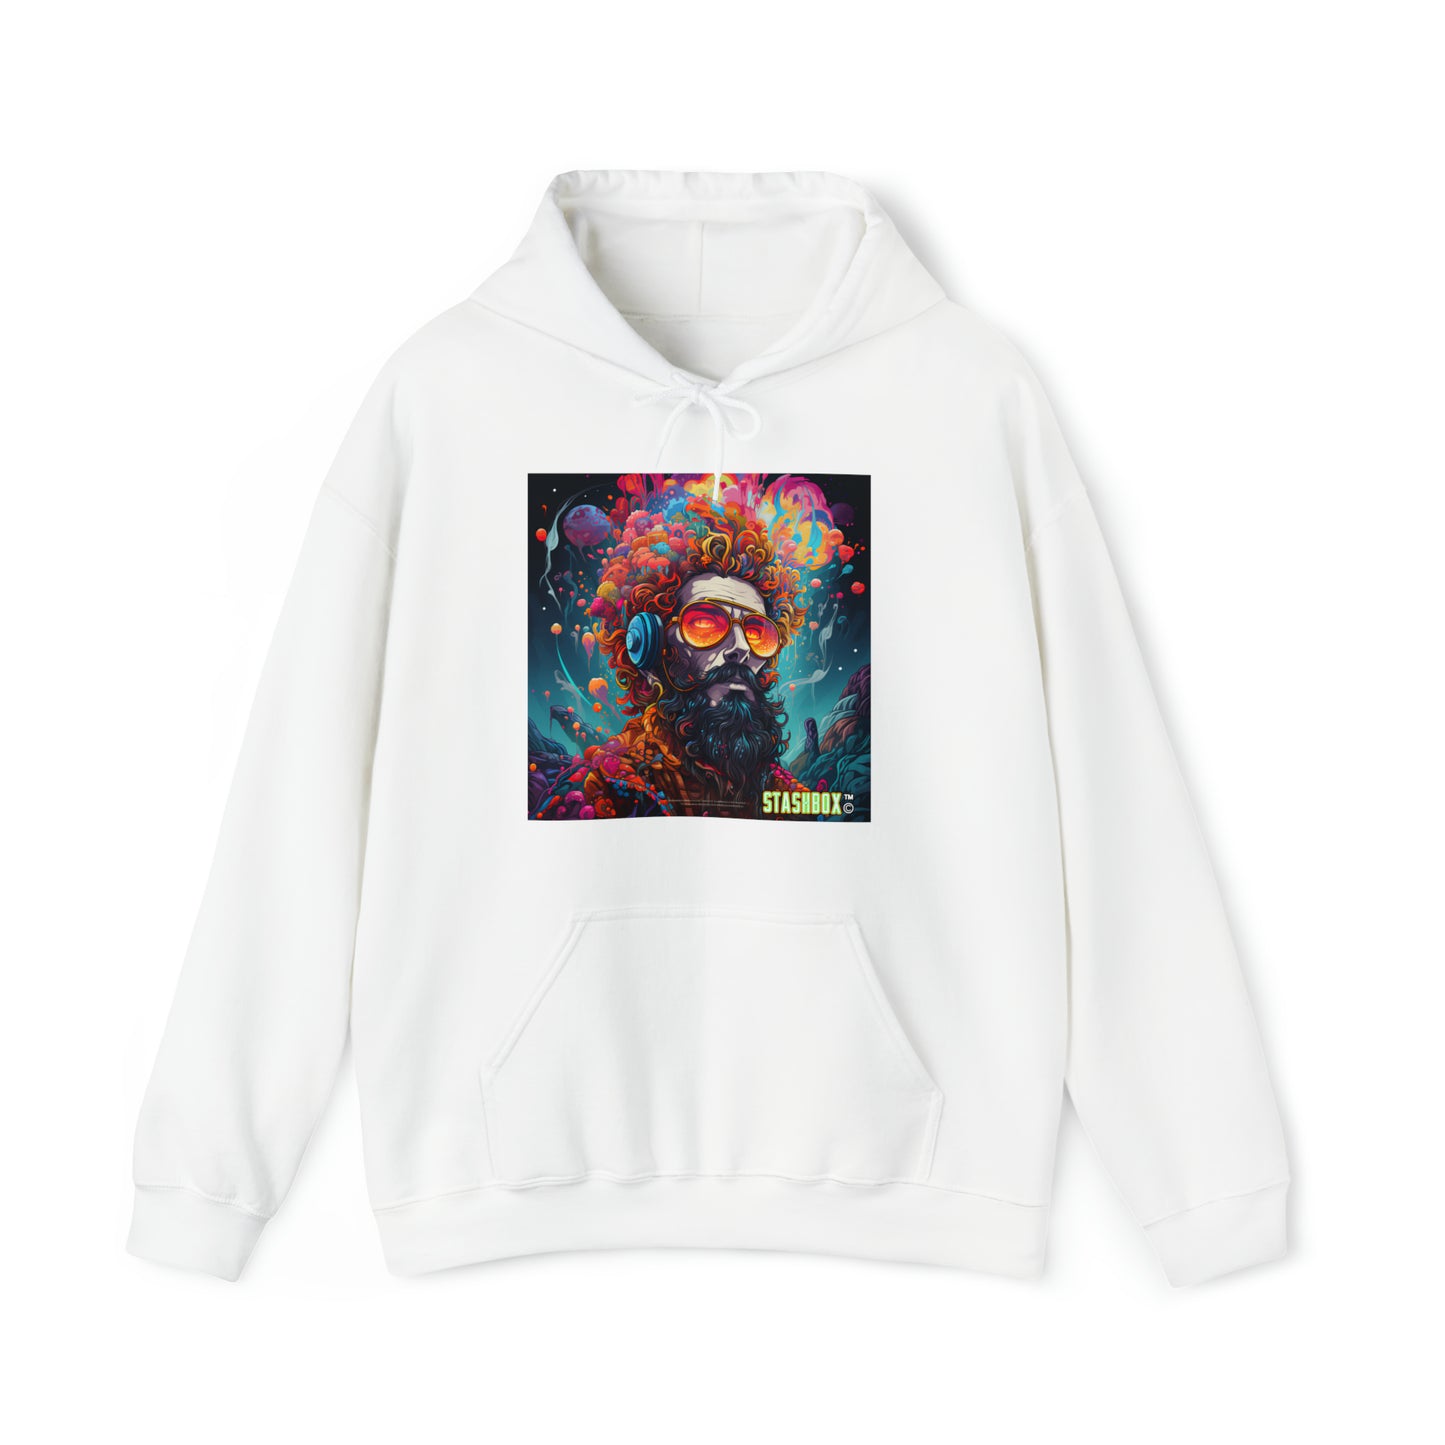 Dive into the Psychedelic MetaVerse with our Producer's Psychedelic Design #003 Hooded Sweatshirt. Wearable art meets digital dreams, exclusively at Stashbox.ai.